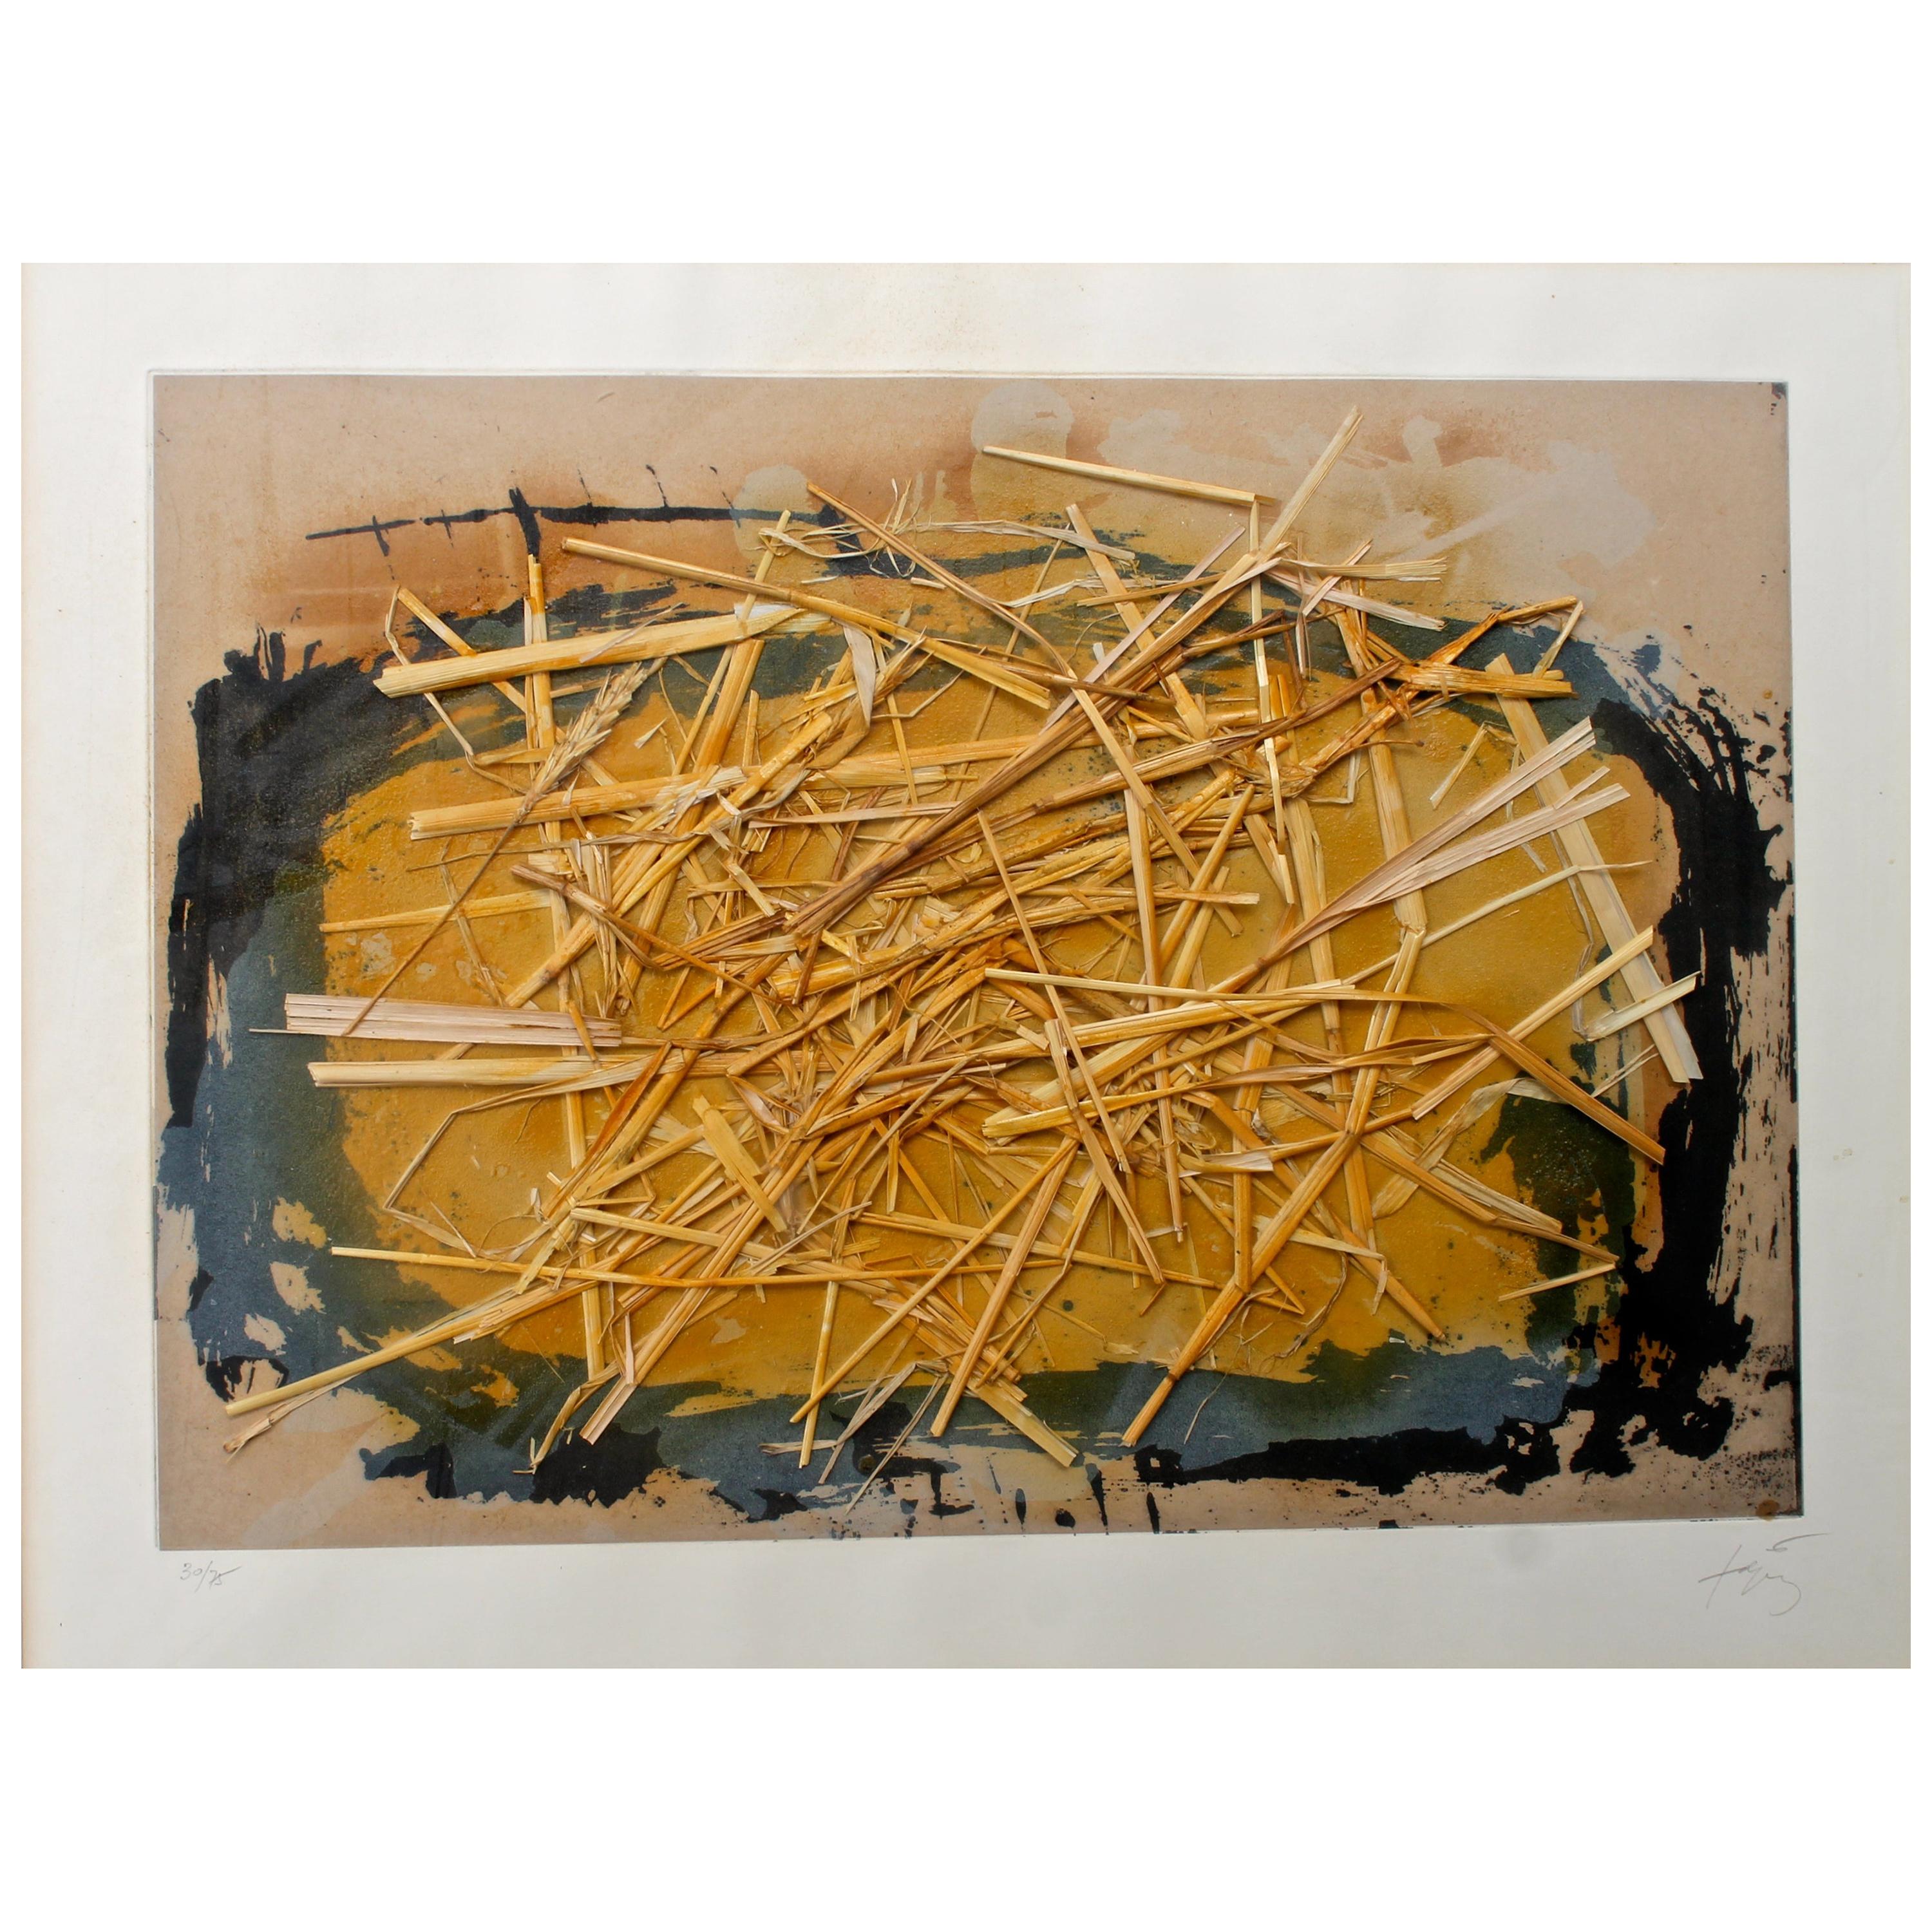 Antoni Tapies 'La Paille' 1969 Aquatint with Straw Collage For Sale